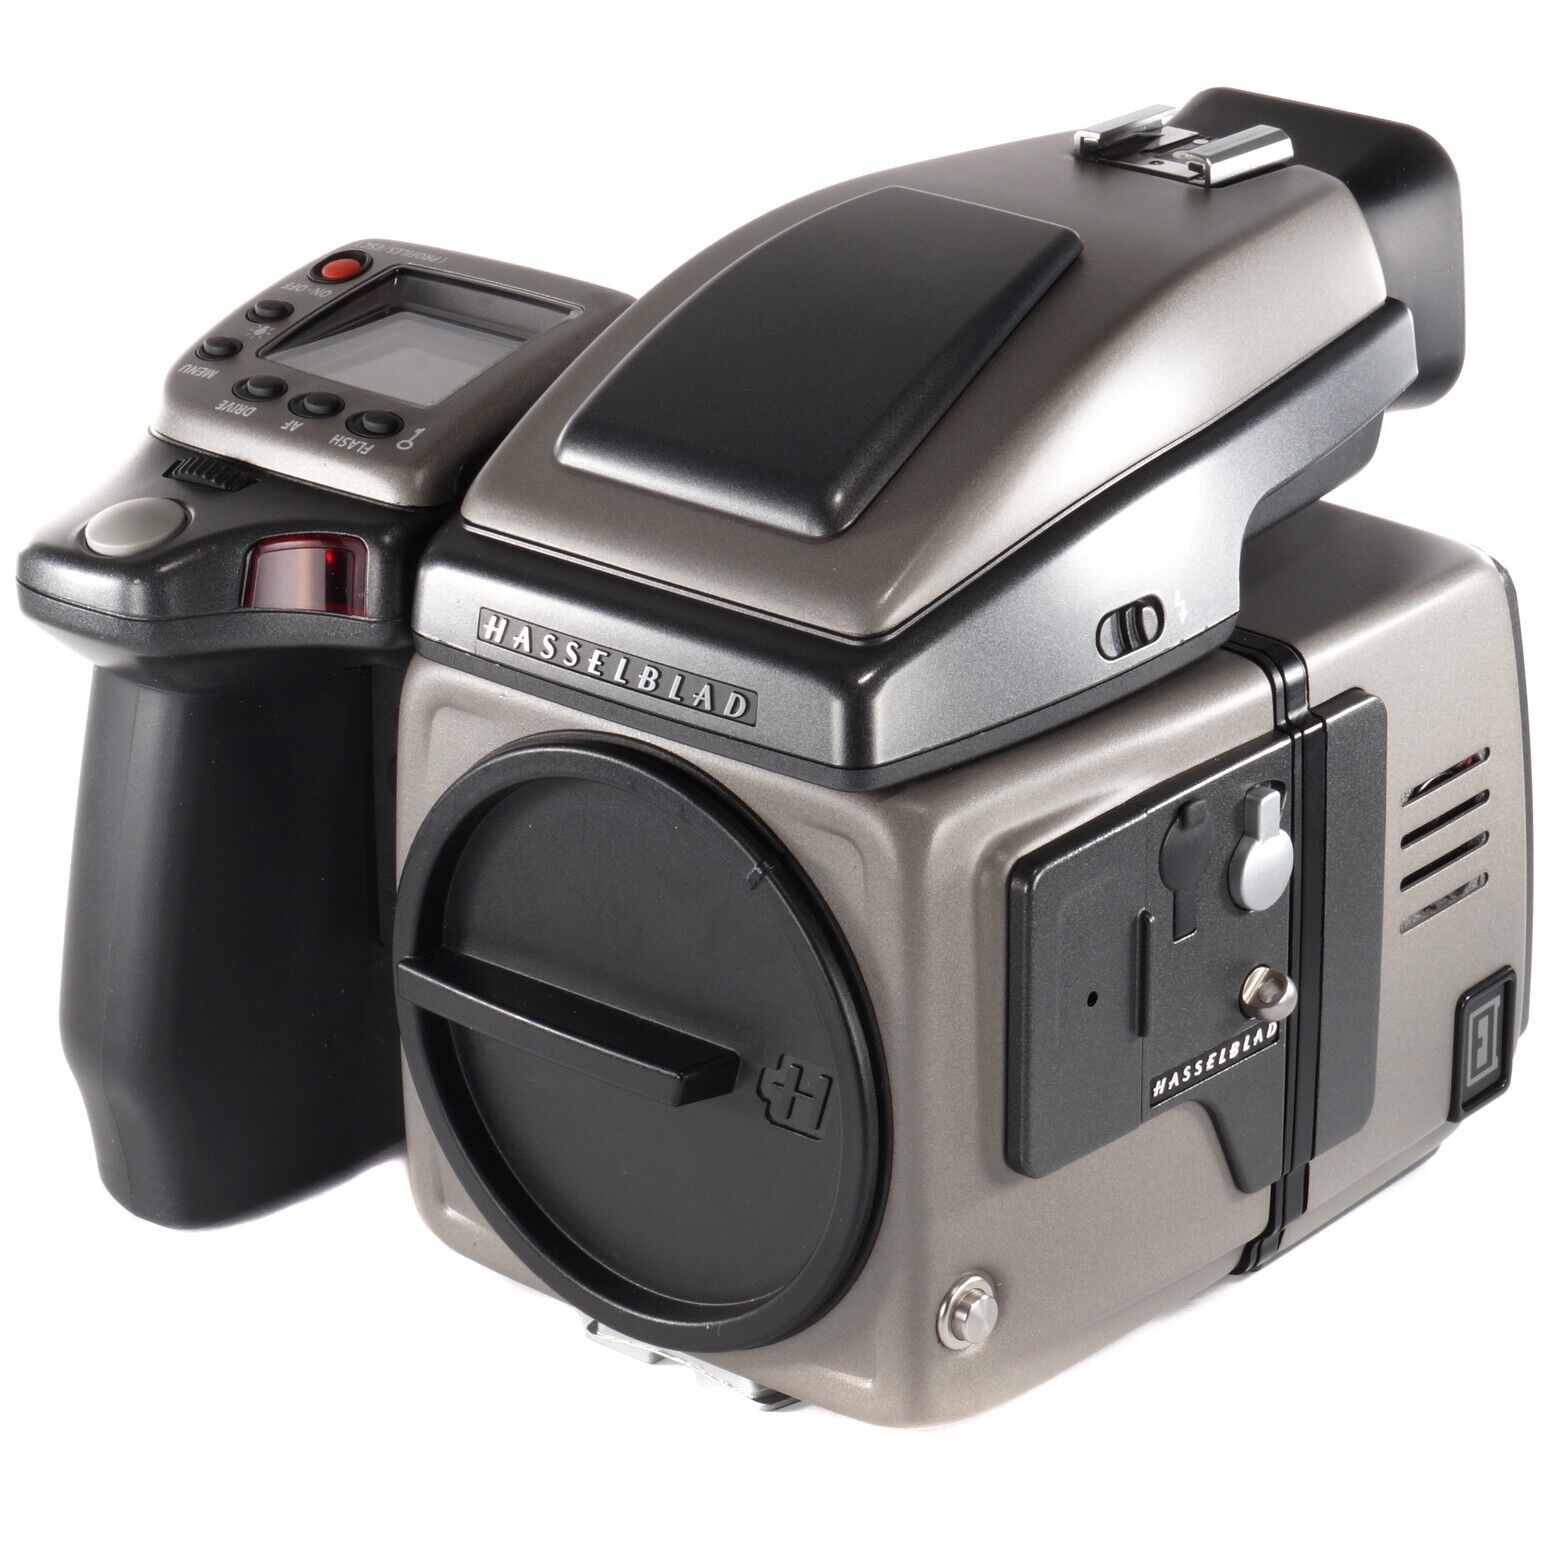 More information about "Corpo macchina Hasselblad H2"